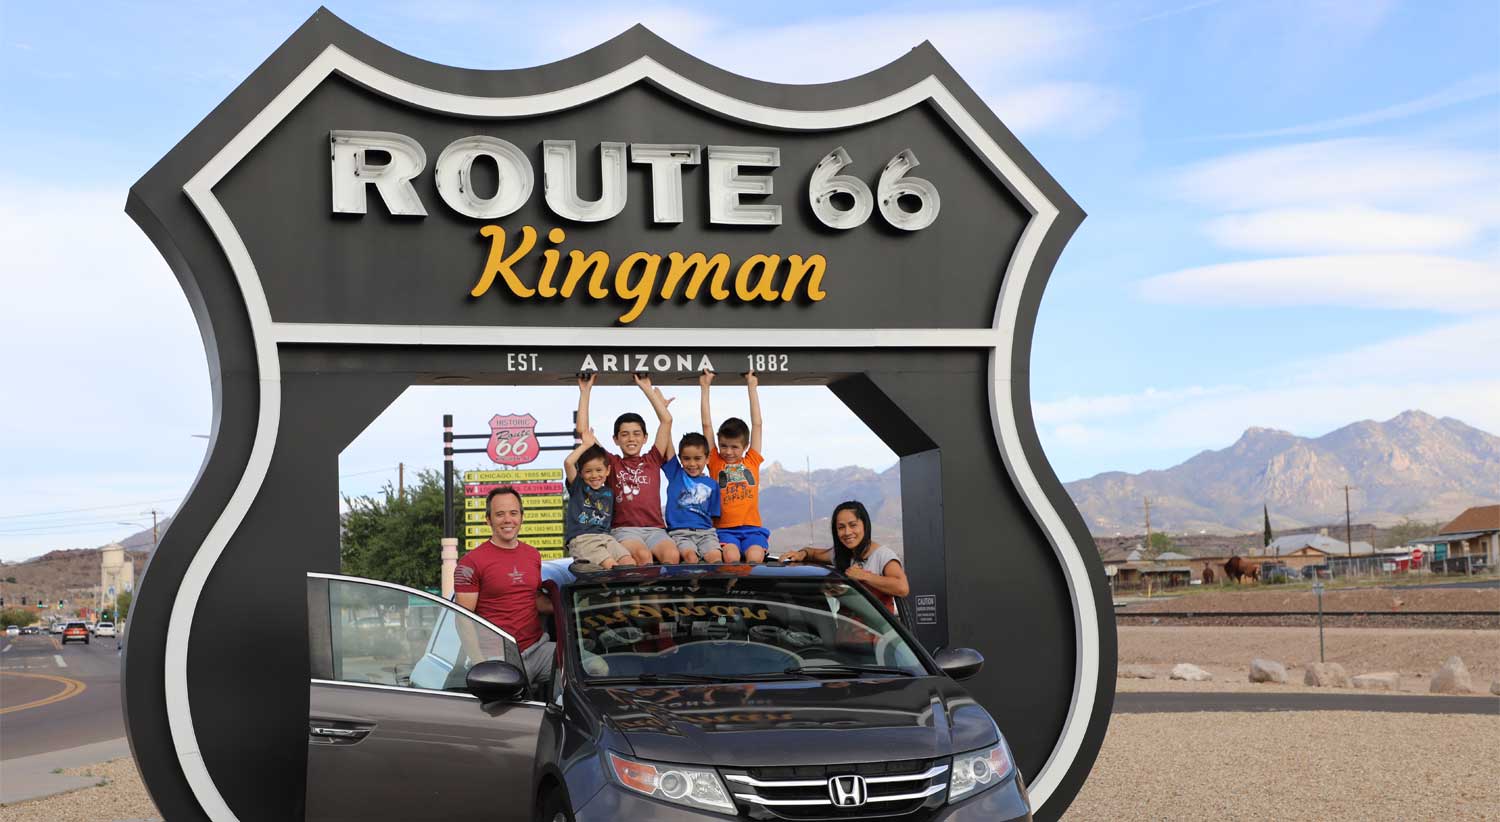 Family in front of Route 66 sign in Kingman, AZ